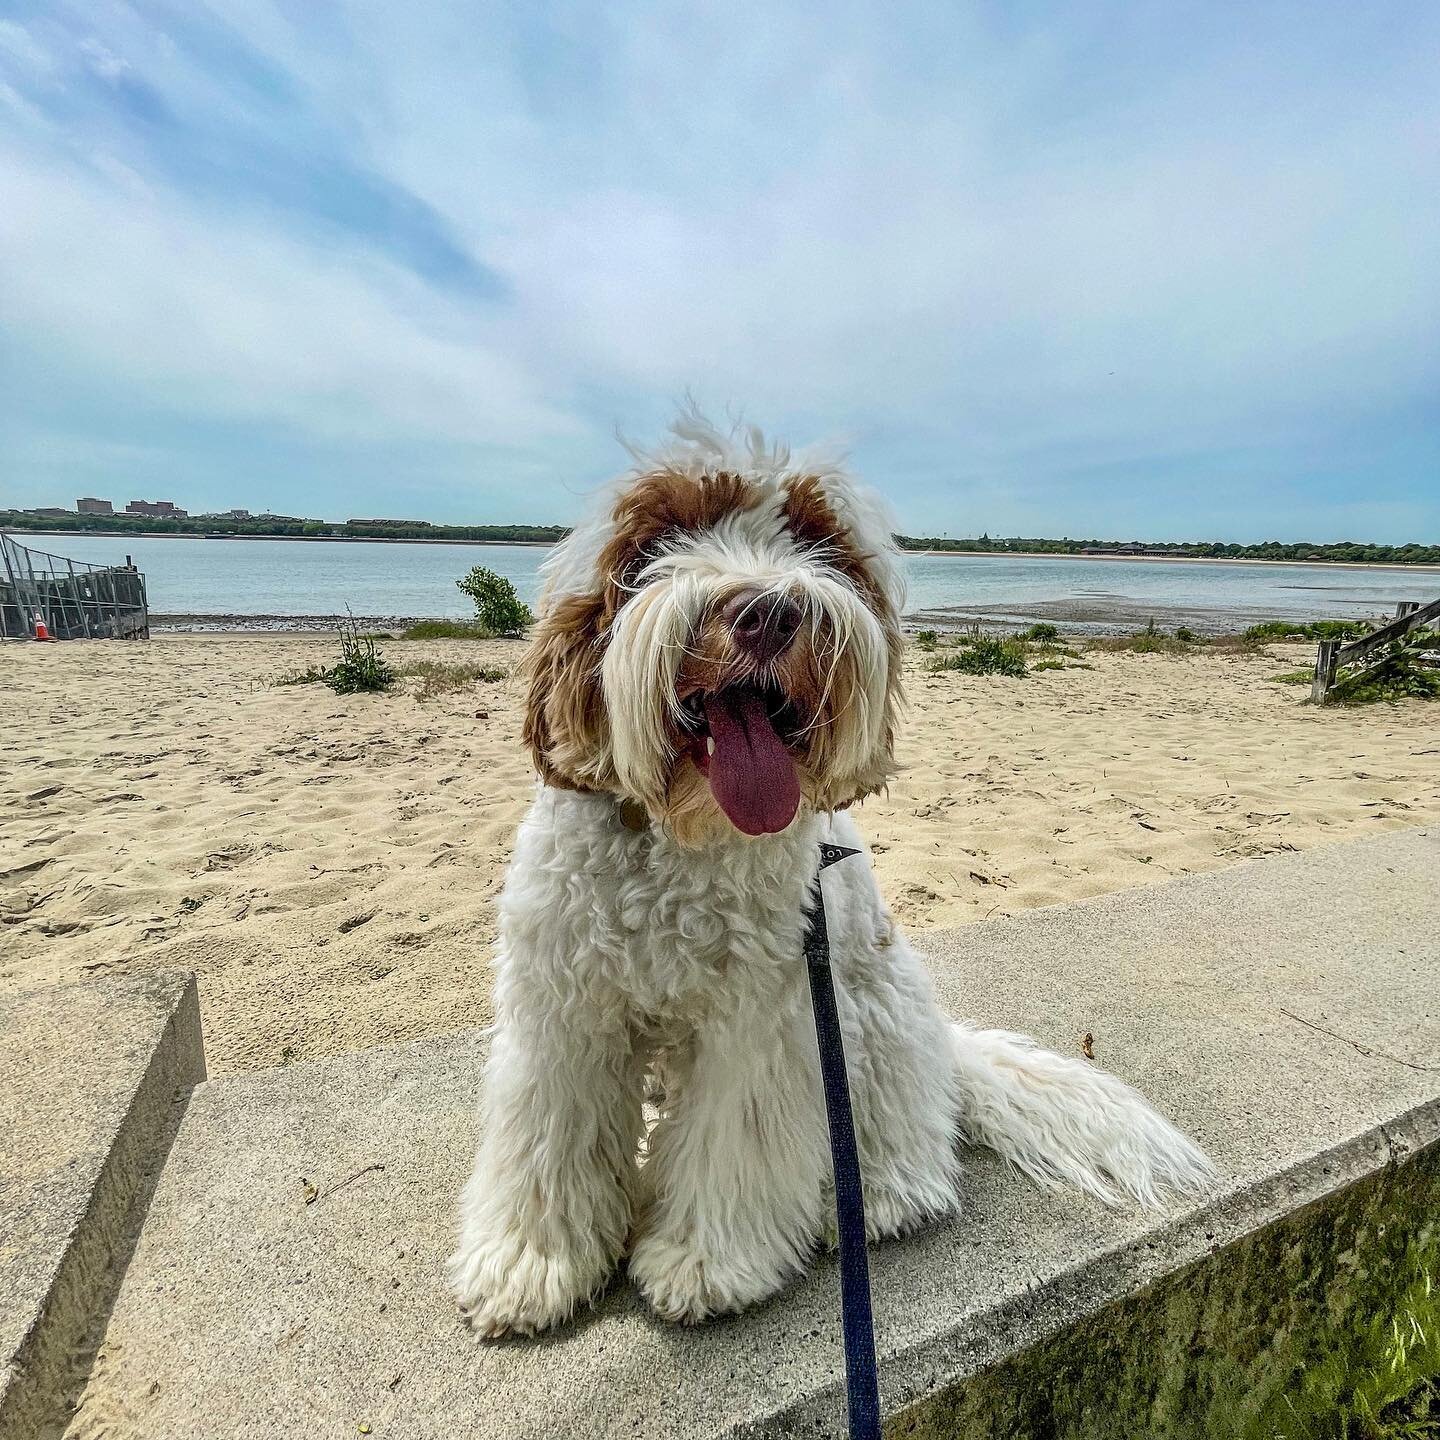 #hi 👋 #southie 👋  it&rsquo;s #me @caymus_is_a_parti 🐾 🐾🐾 #happy 👅 #tot 👅 
:
:
:
:
:
#hapypawsboston #happydog #dogsofinstagram #doglife #southboston #southiedogs #boston #southboston #02127 #babe #mansbestfriend #doodle #babe #handsomeboy #ado